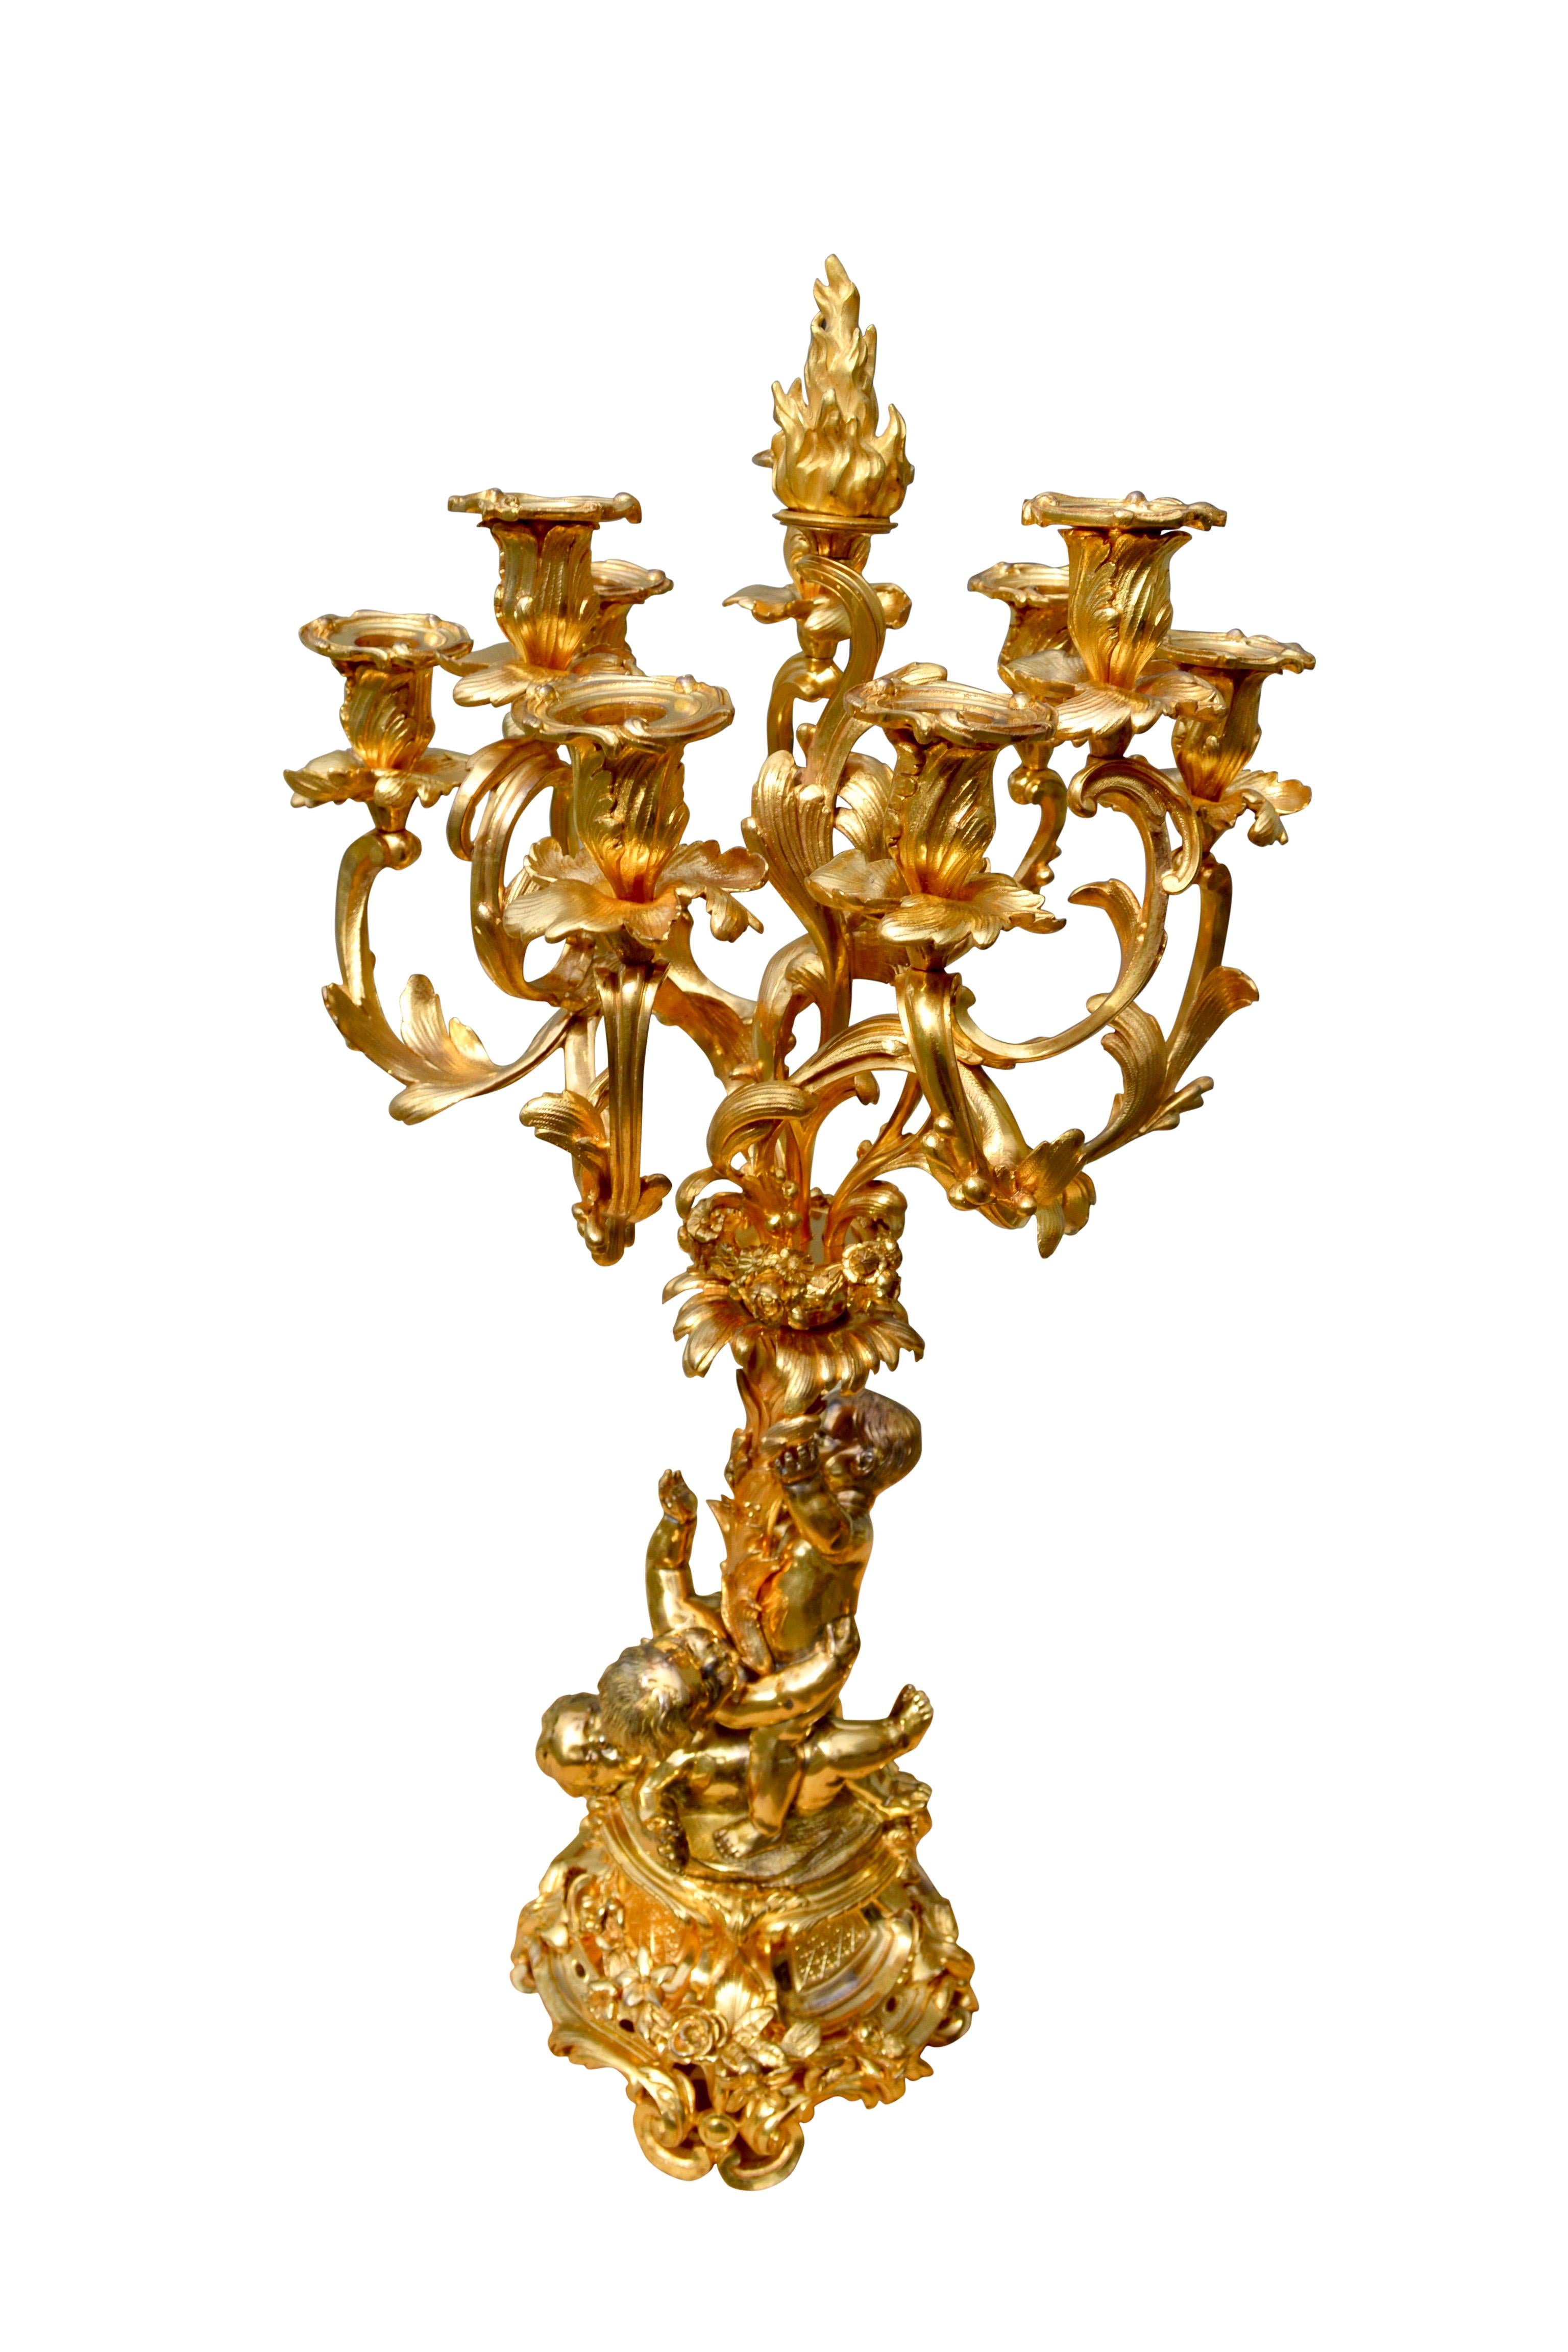 Napoleon III Period Gild Bronze Table Centre and Matching Candelabra 1